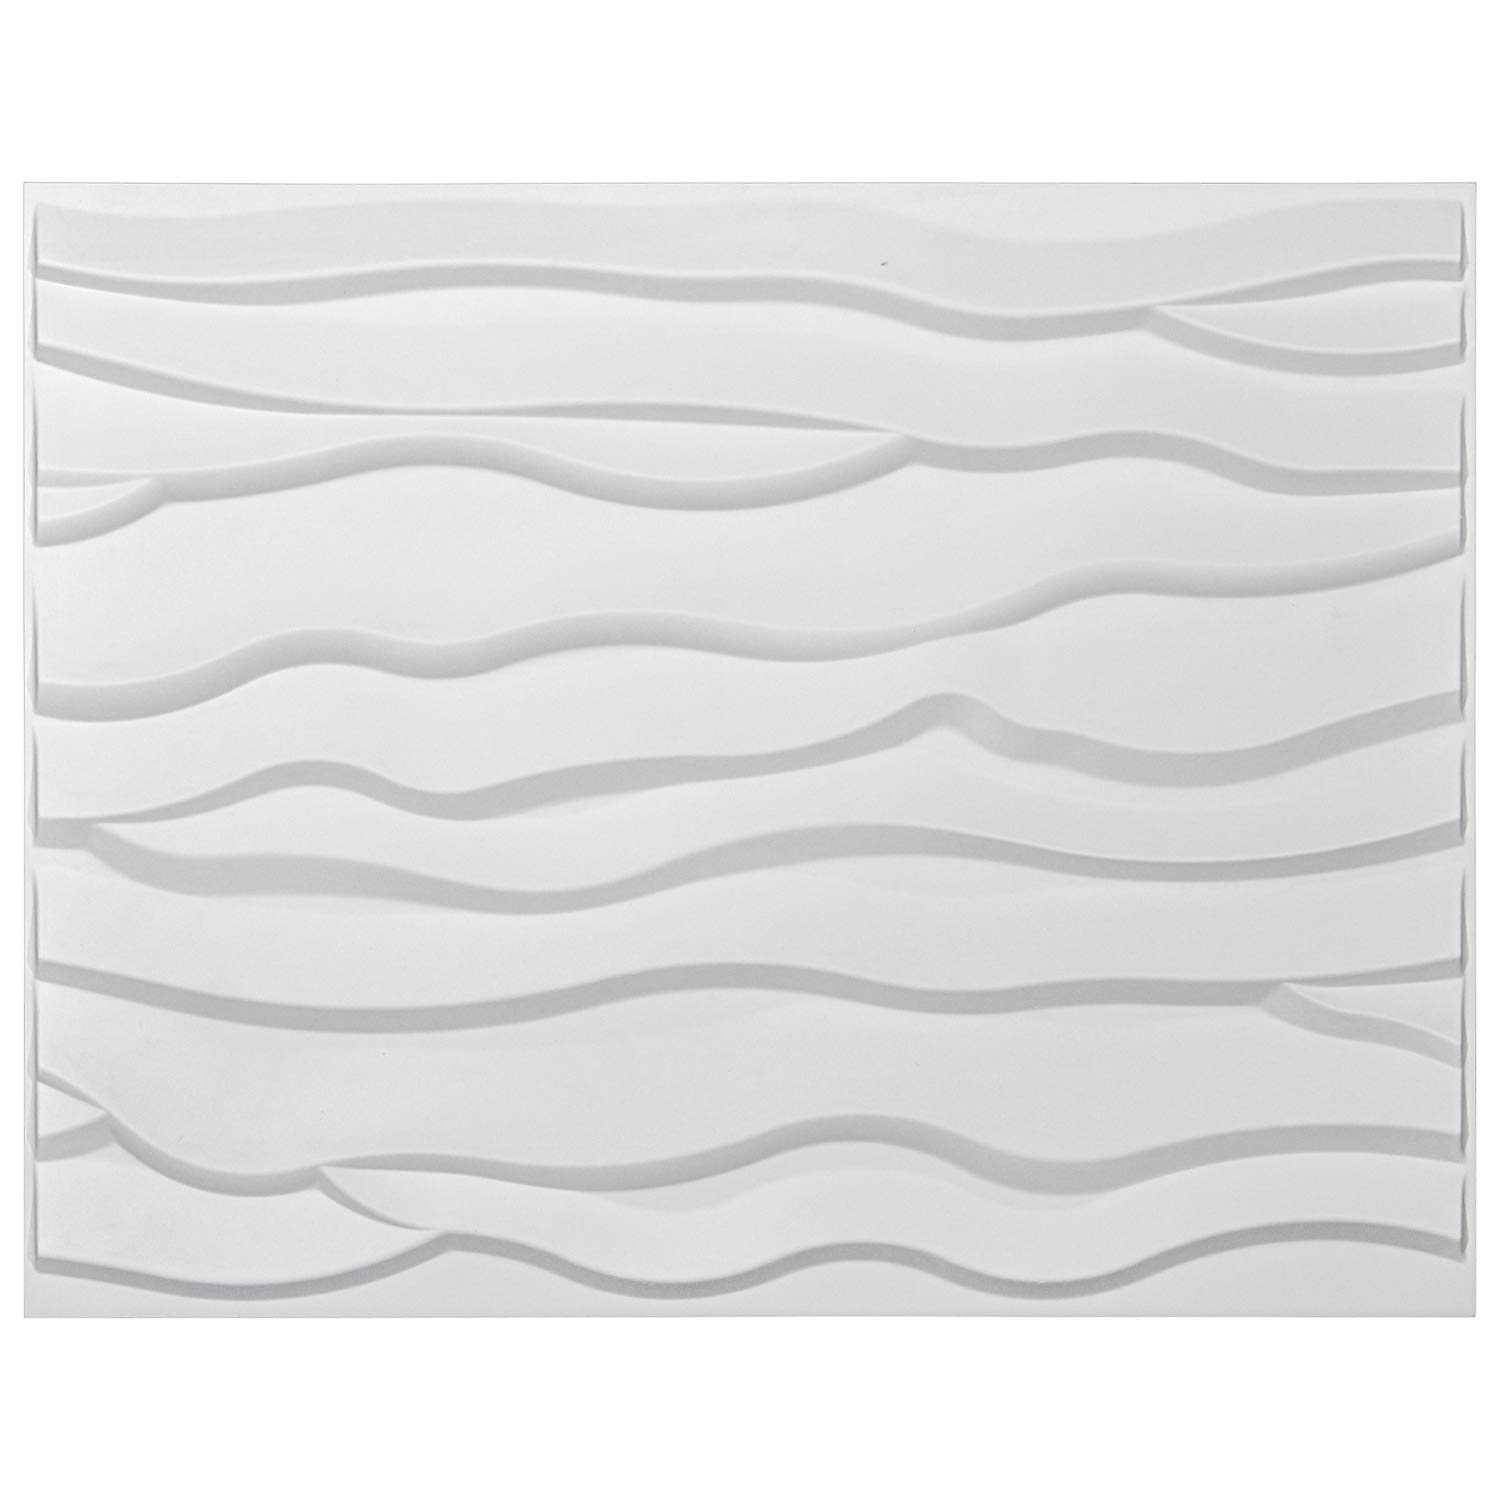 A21059 - 3D Textured Wainscoting 3D Wall Panels Off-white (Set of 6) 32 Sq.Ft